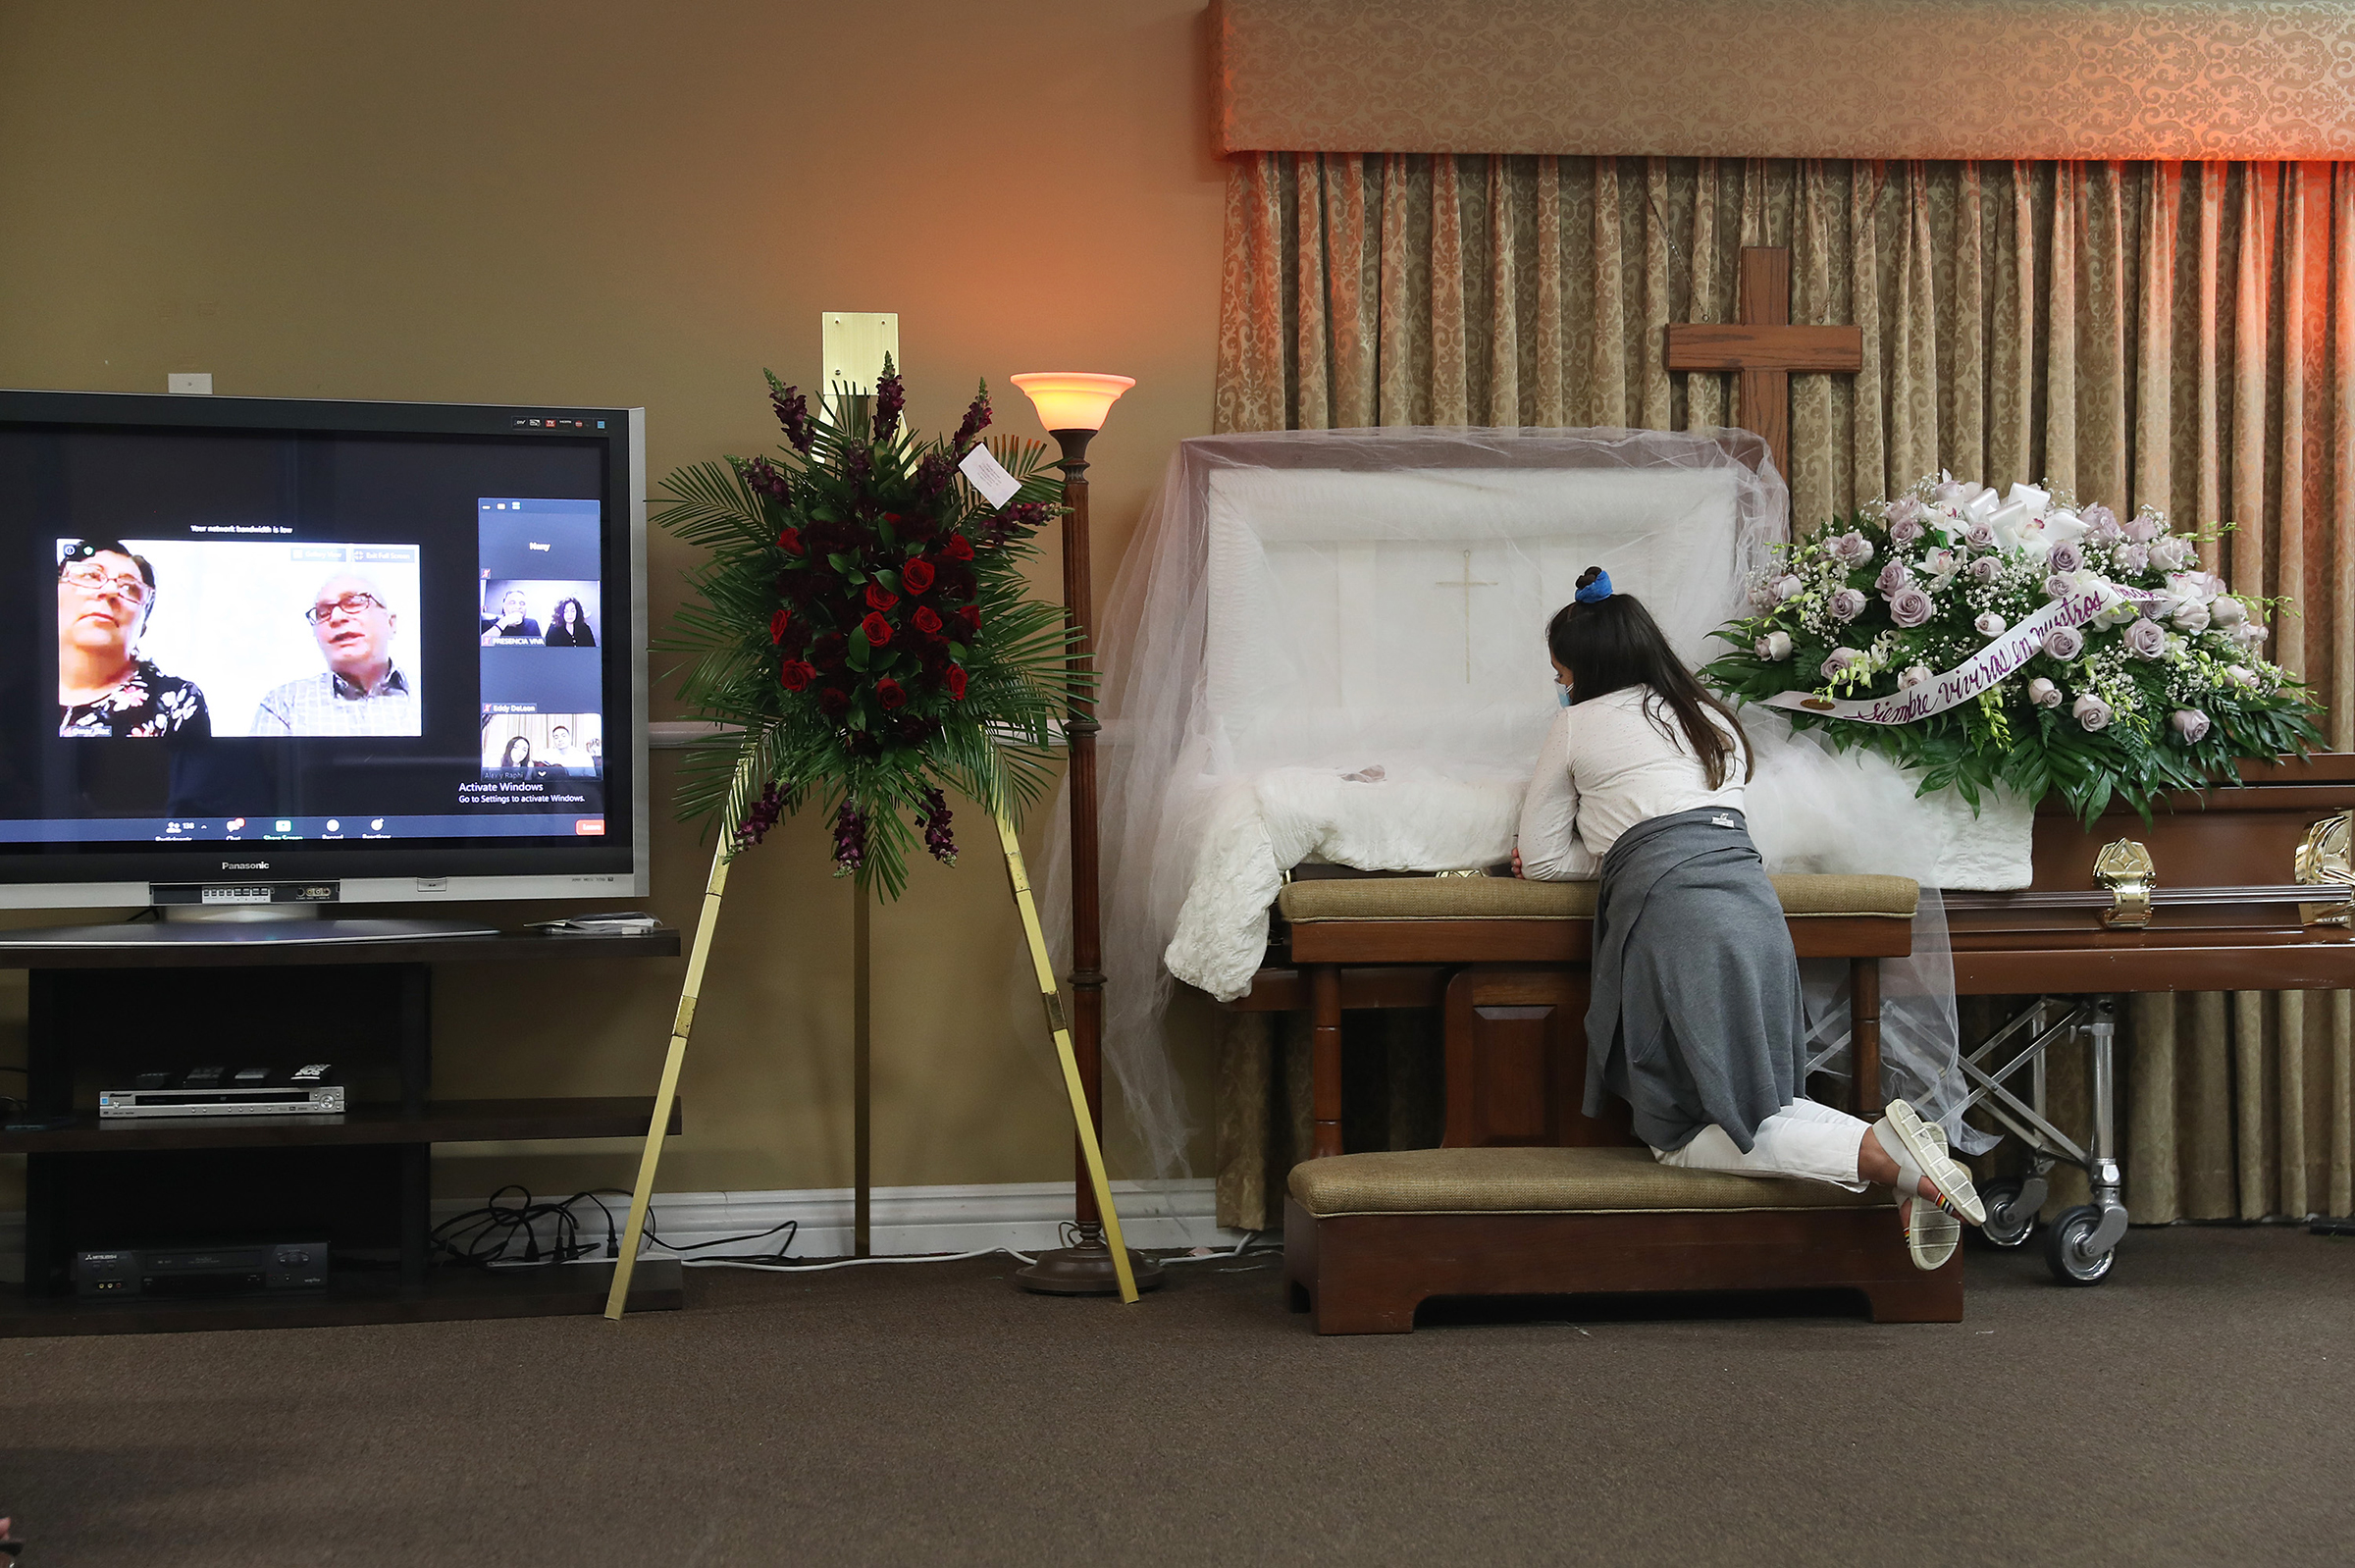 Asare Amaya, 10, mourns for her father, German Amaya, as family and friends are shown via a Zoom broadcast at the Maspons Funeral Home in Miami on Aug. 8, 2020. German Amaya, who died from COVID-19, had worked for 11 years at the Fontainebleau Miami Beach luxury hotel before he was furloughed in March. In late June, the family says, the hotel cut health care coverage for workers who had been laid off during the pandemic; in turn, the family lost his $10,000 death benefit. (Joe Raedle—Getty Images)